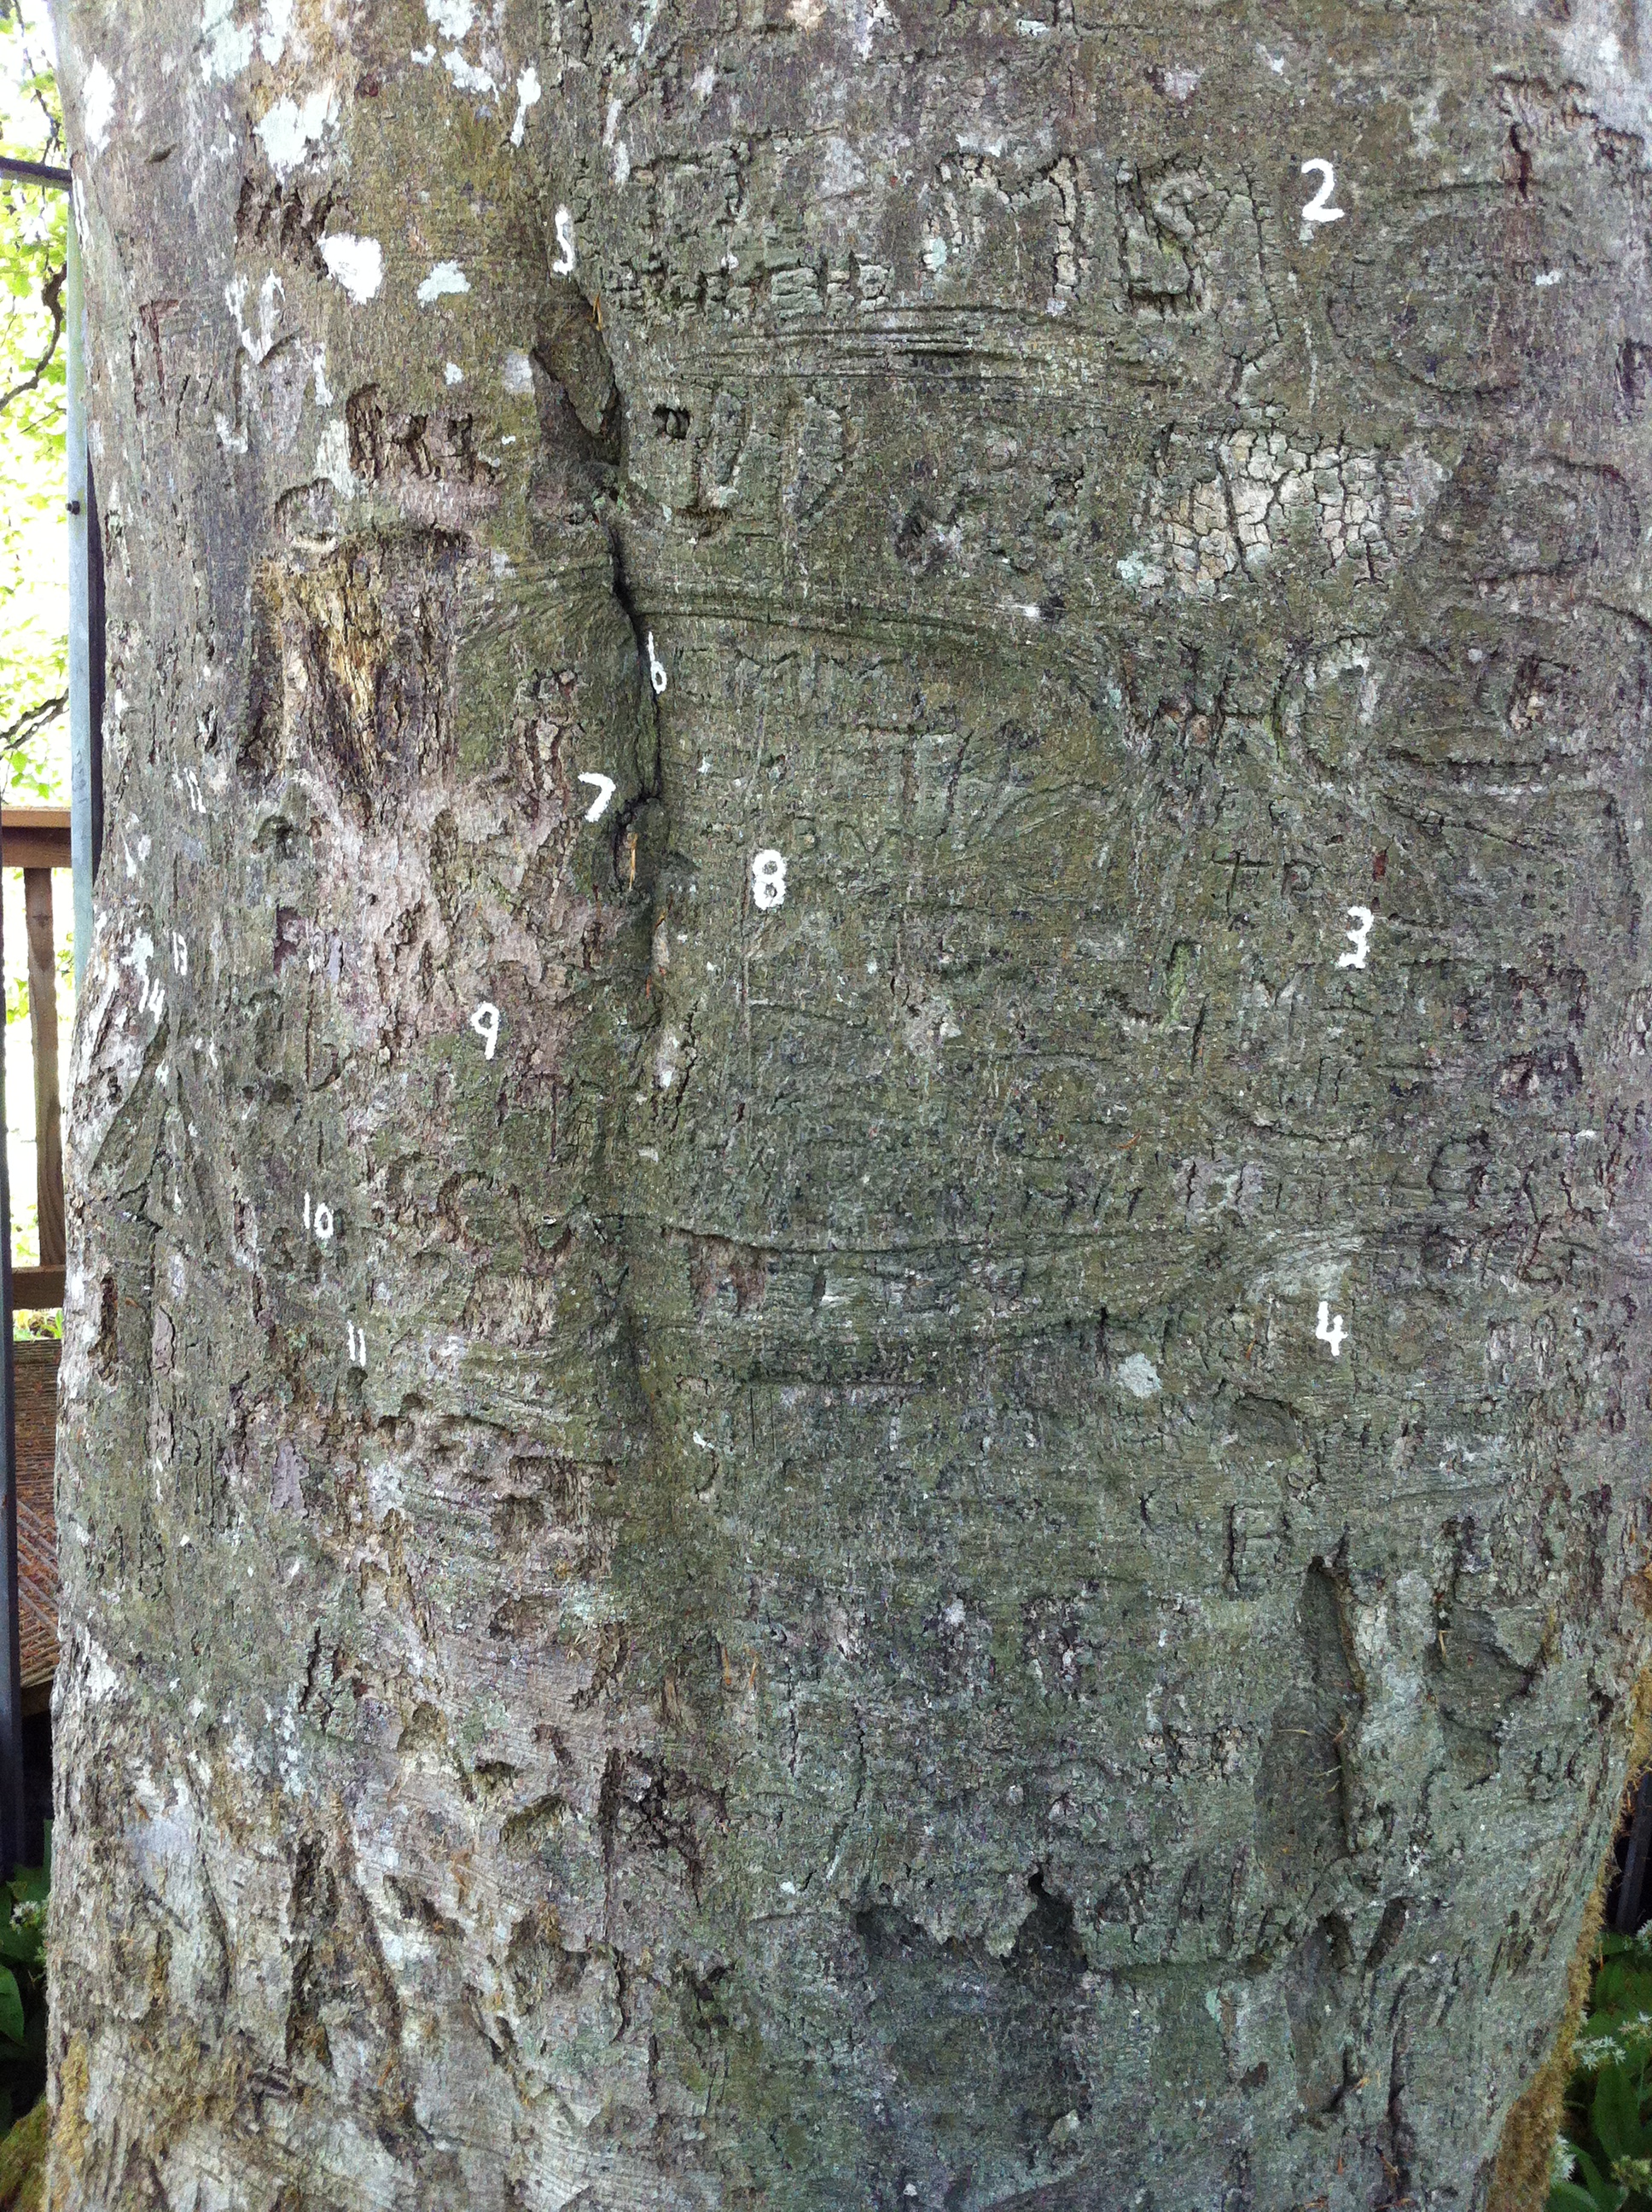 The trunk of the Autograph Tree in Coole Park. Photo by Annis Householder.